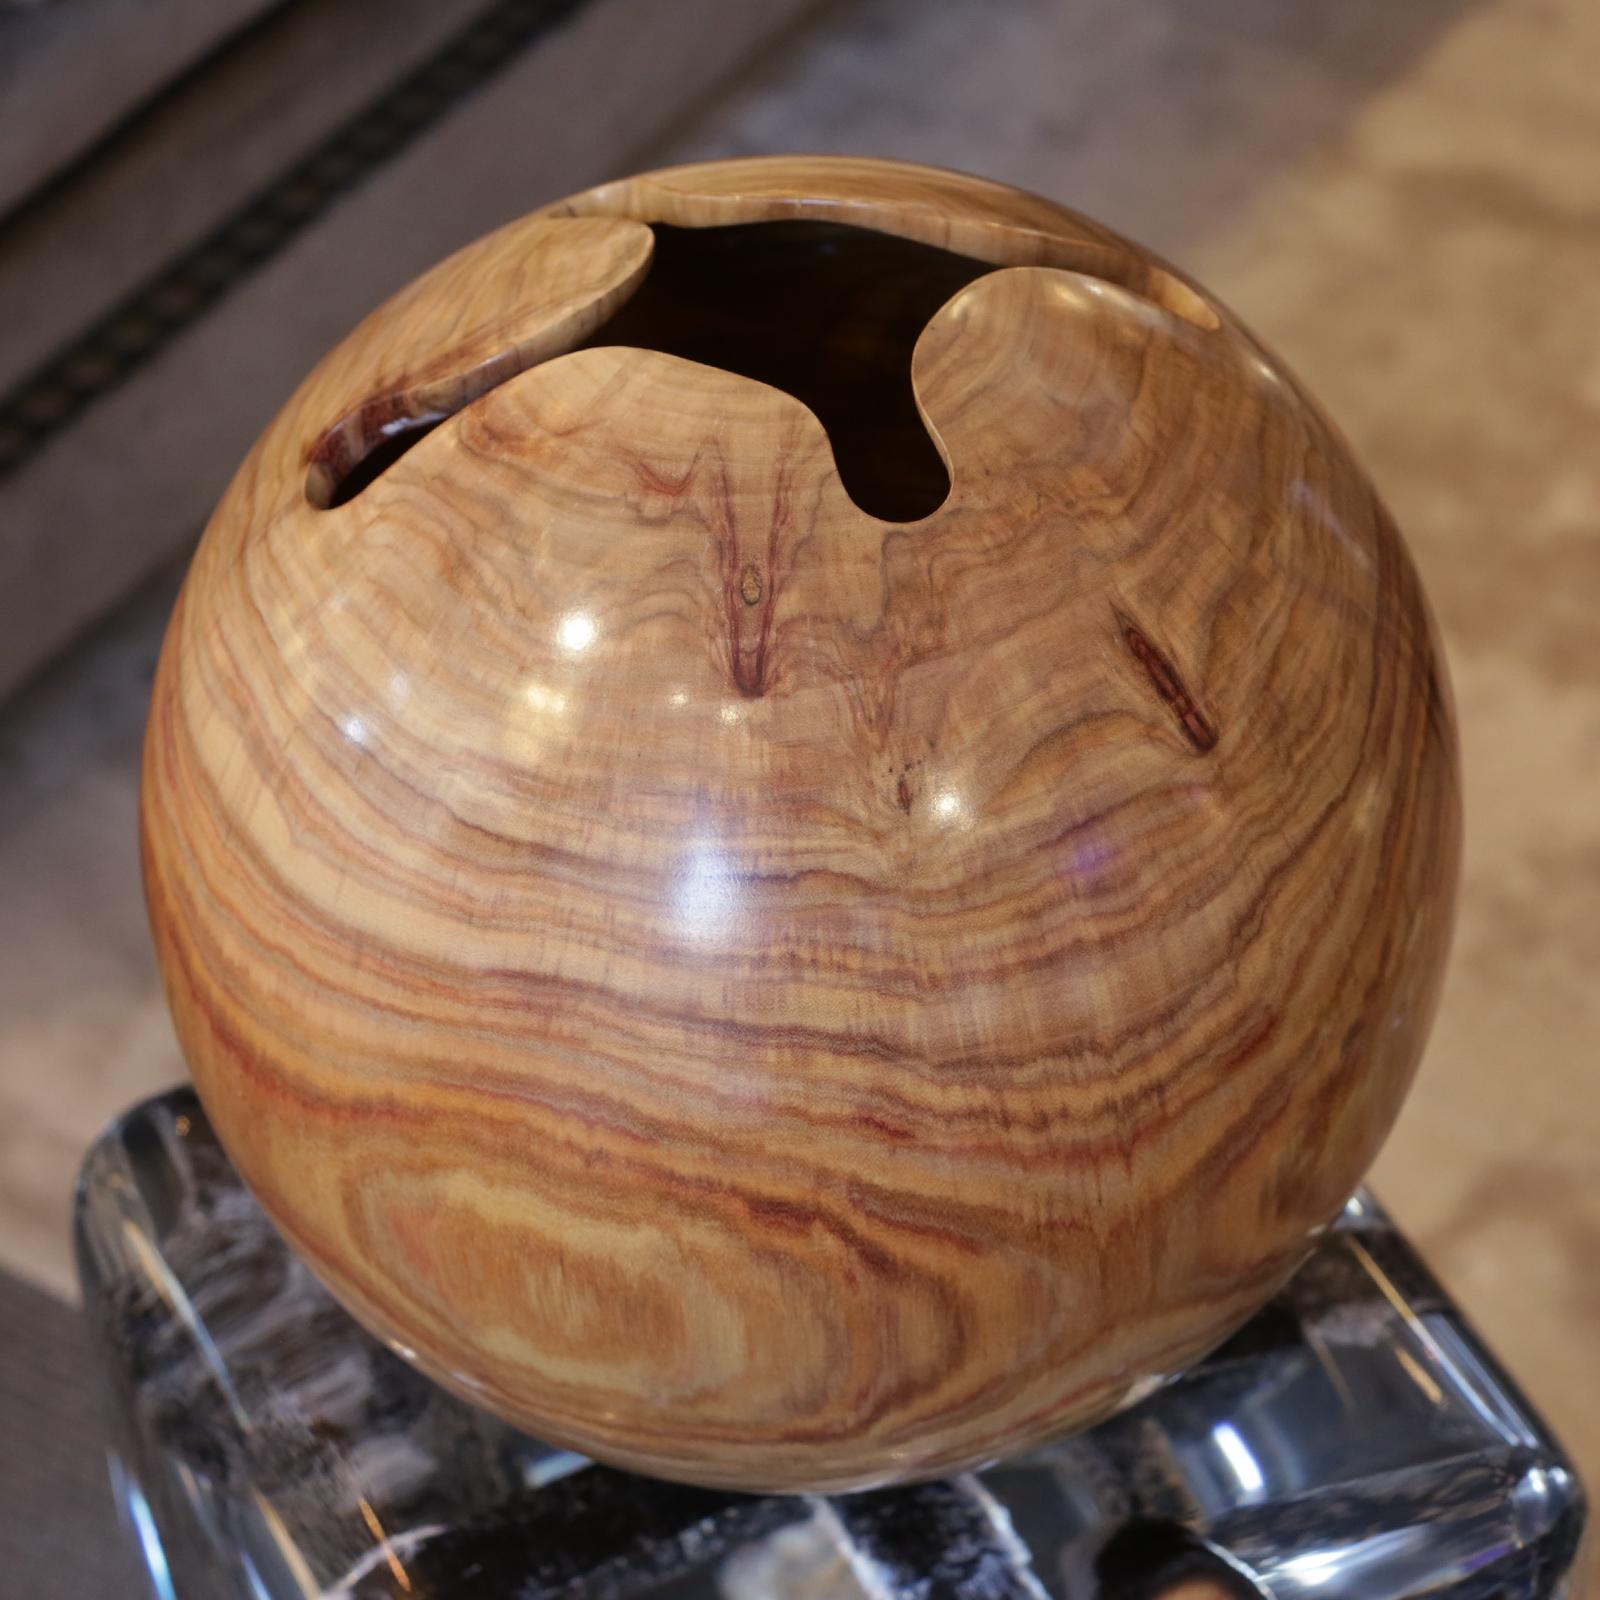 Sculpture Tarara Amaria ball
in solid Tarara Amaria wood (Brazil),
Perfectly carved in the shape of a sphere
and polished. Exceptional piece.
Measures: Diameter 28 cm x height 28cm.